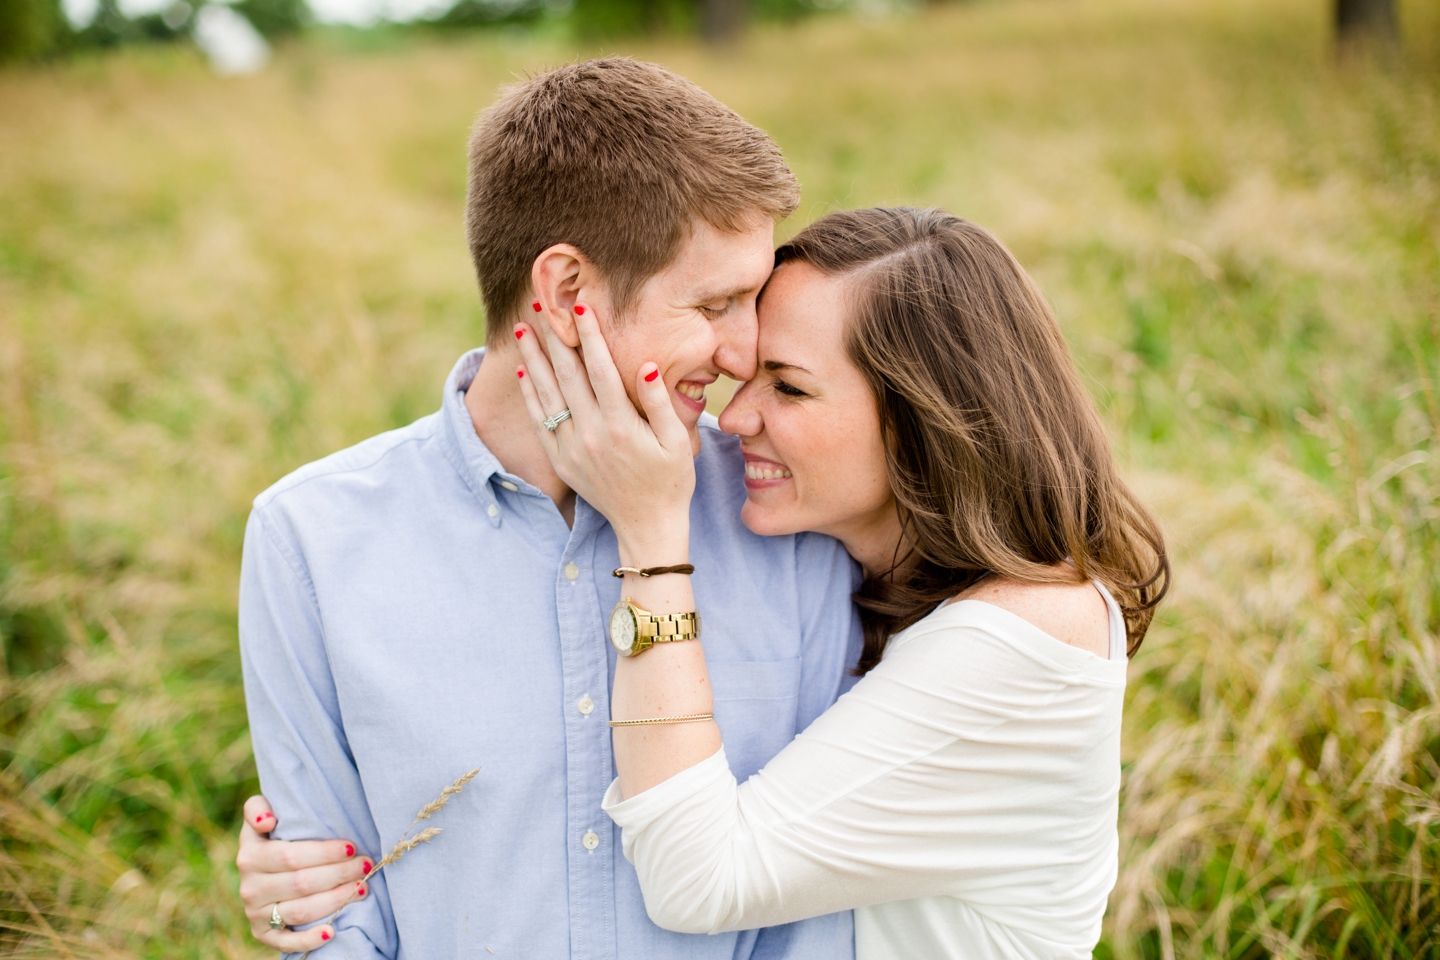 Engagement Sessions, For Brides, The Importance of Engagement Sessions, Jessica Lauren 